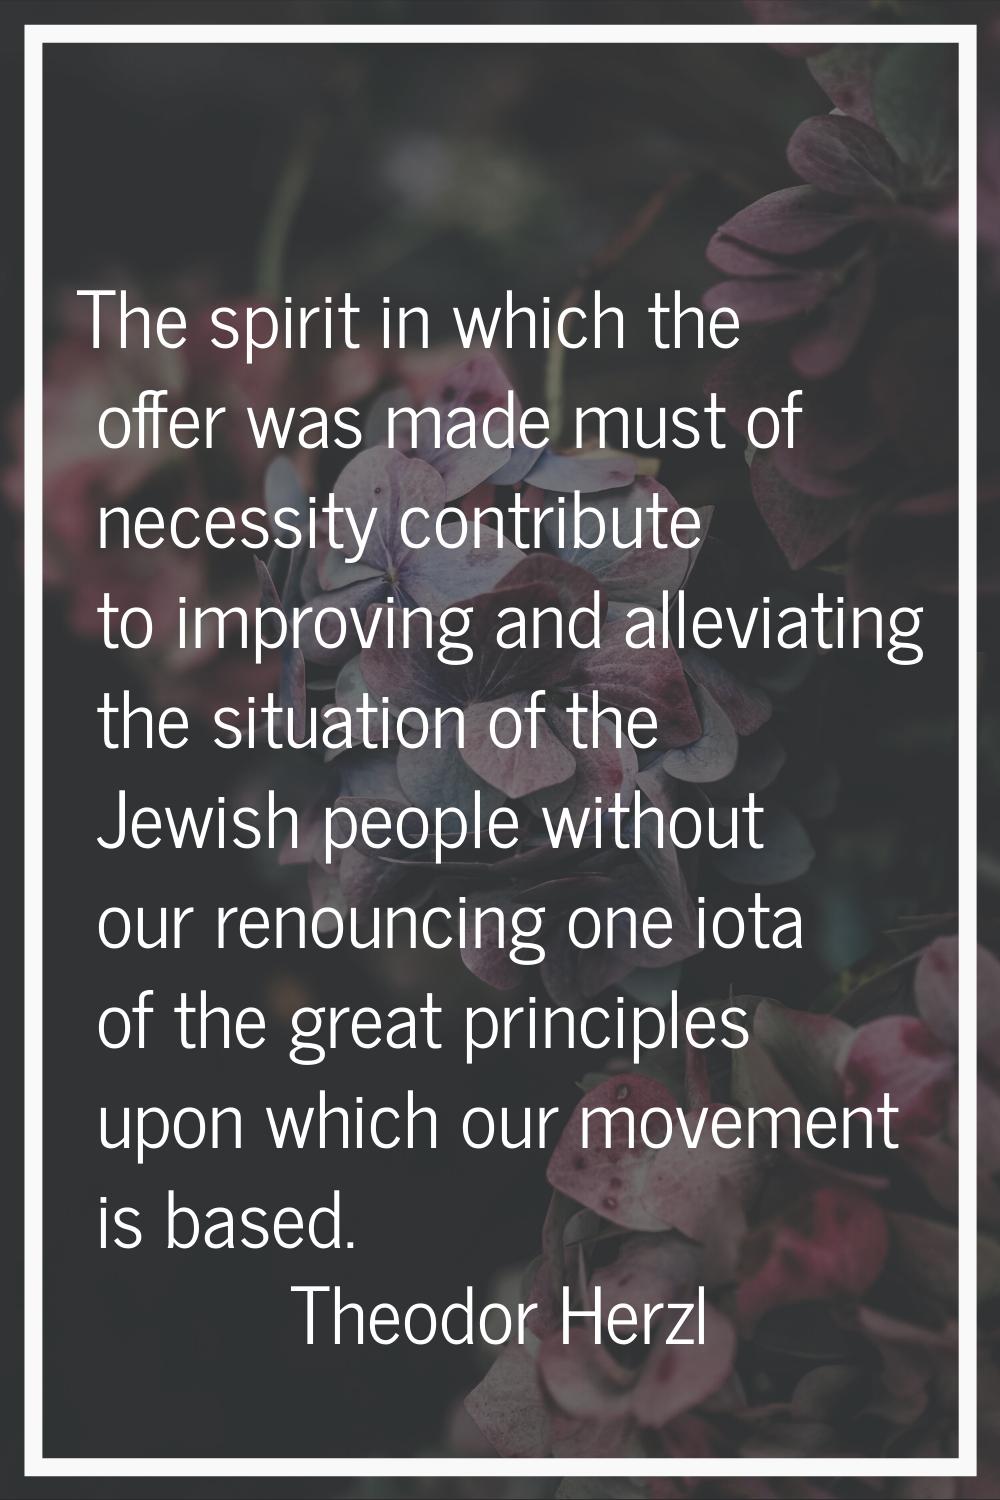 The spirit in which the offer was made must of necessity contribute to improving and alleviating th